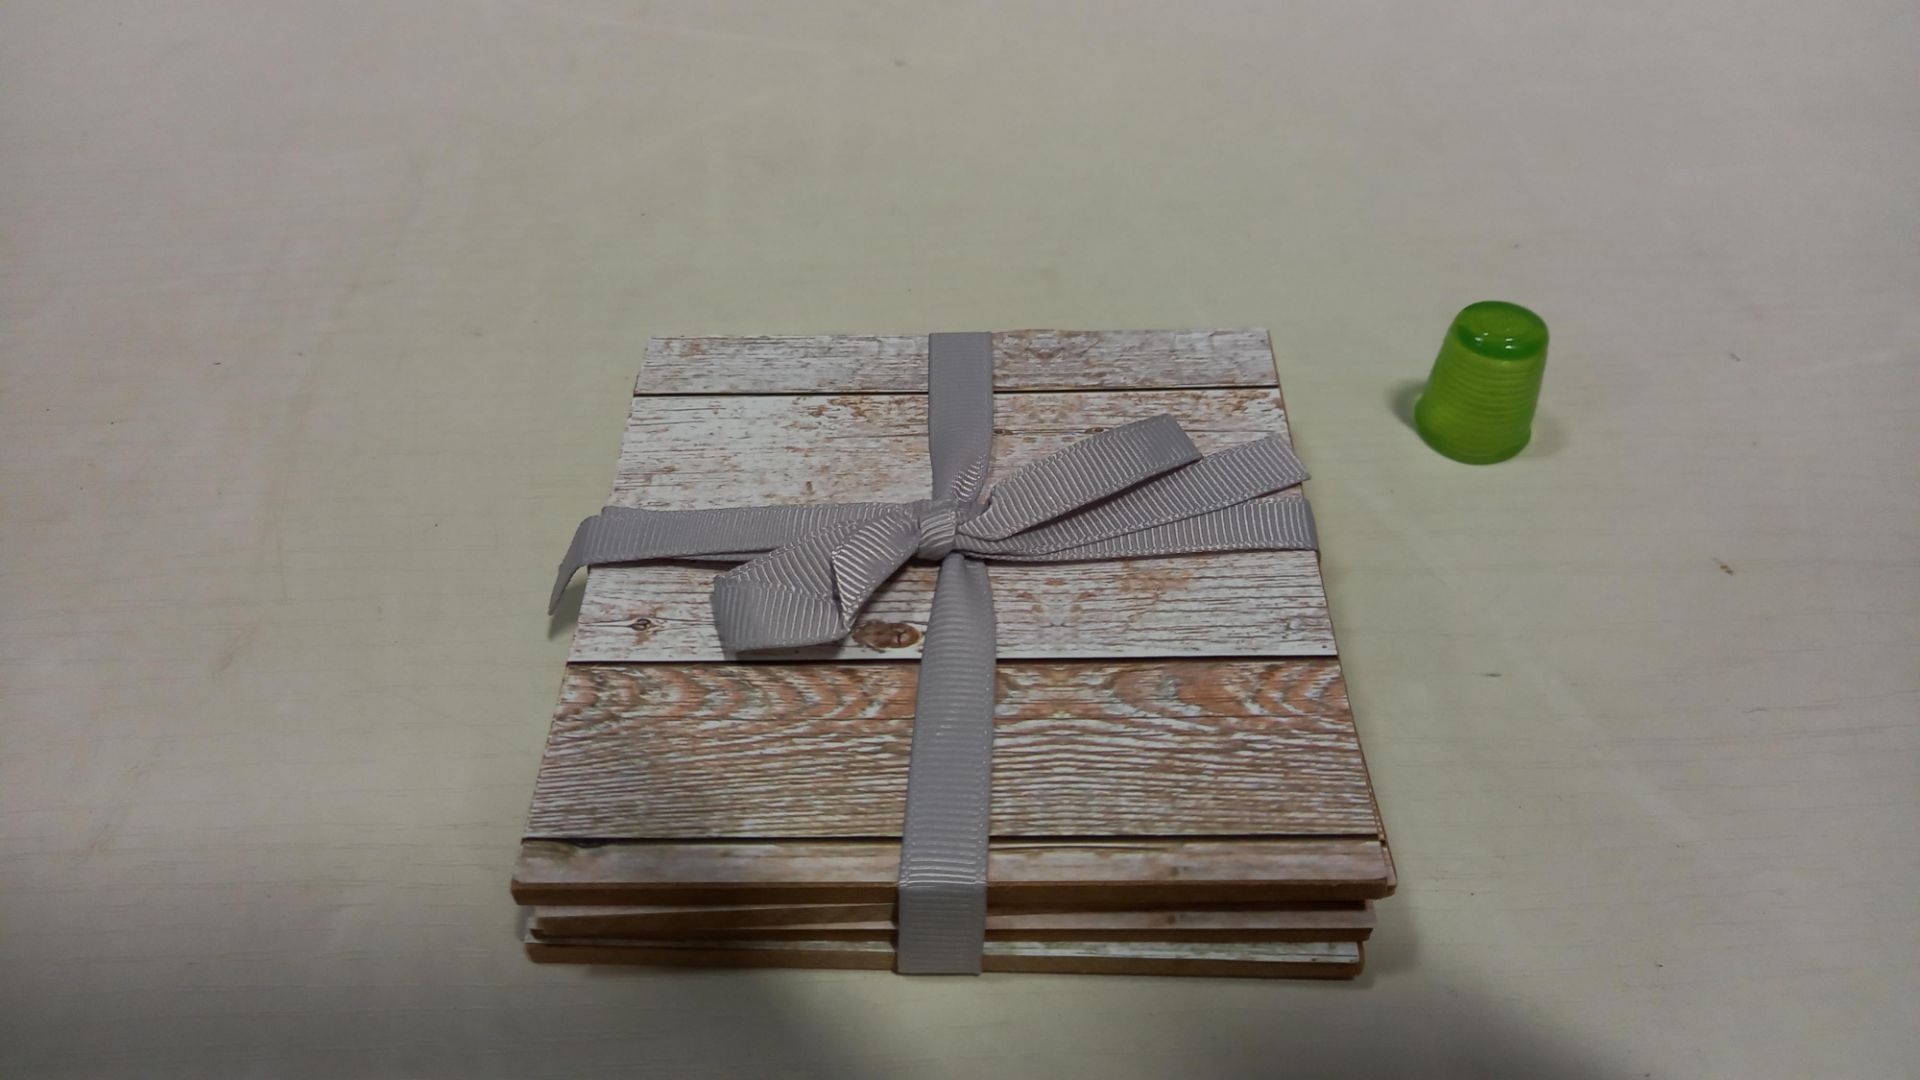 480 X 4 PACK MDF COASTER SETS - PAPER TOPPED DESIGN - IN 20 CARTONS